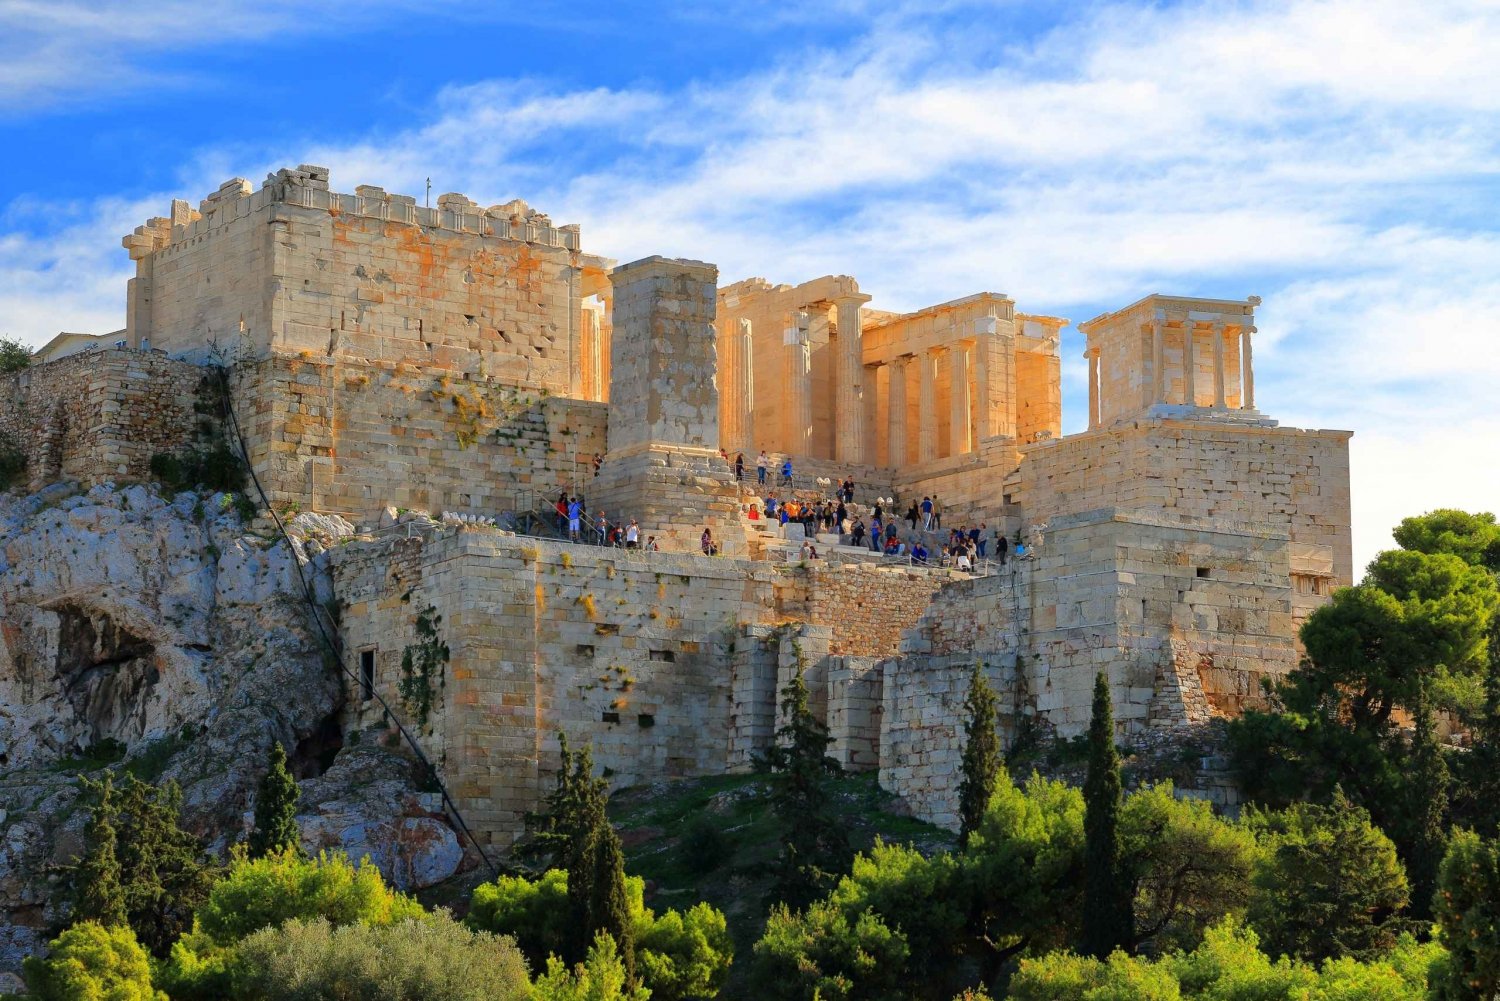 Acropolis and Acropolis Museum Tour with Entry Tickets